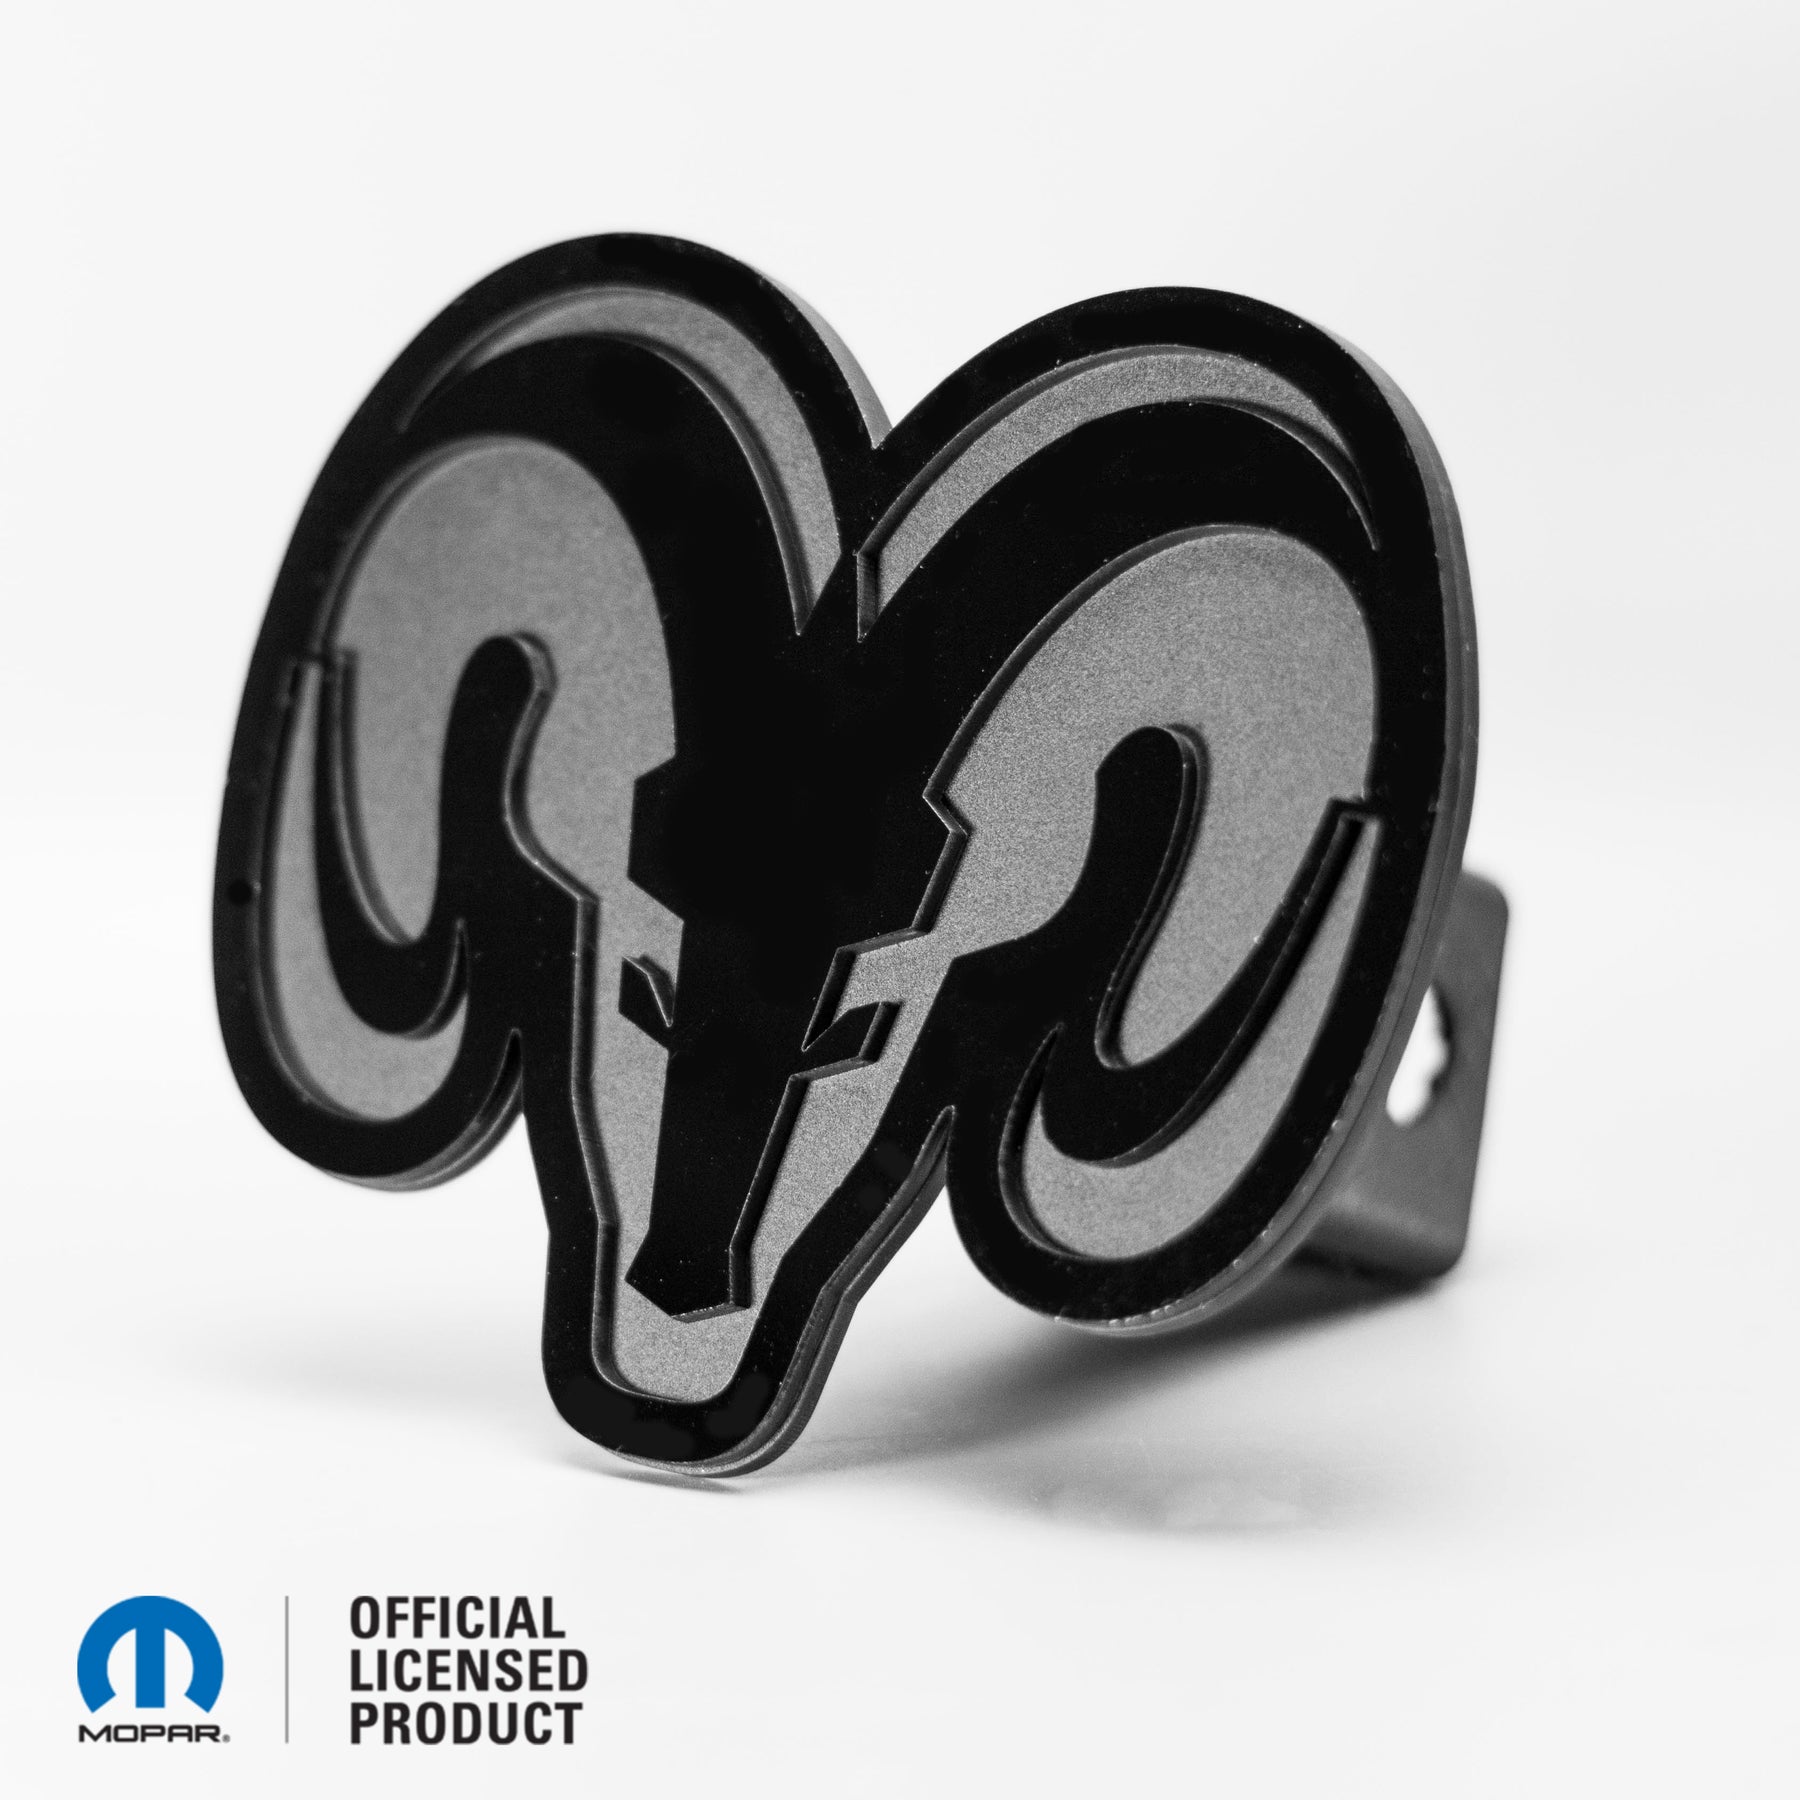 RAM® HEAD LOGO STYLE 1 - HITCH COVER - Gloss on Matte - Officially Licensed Product